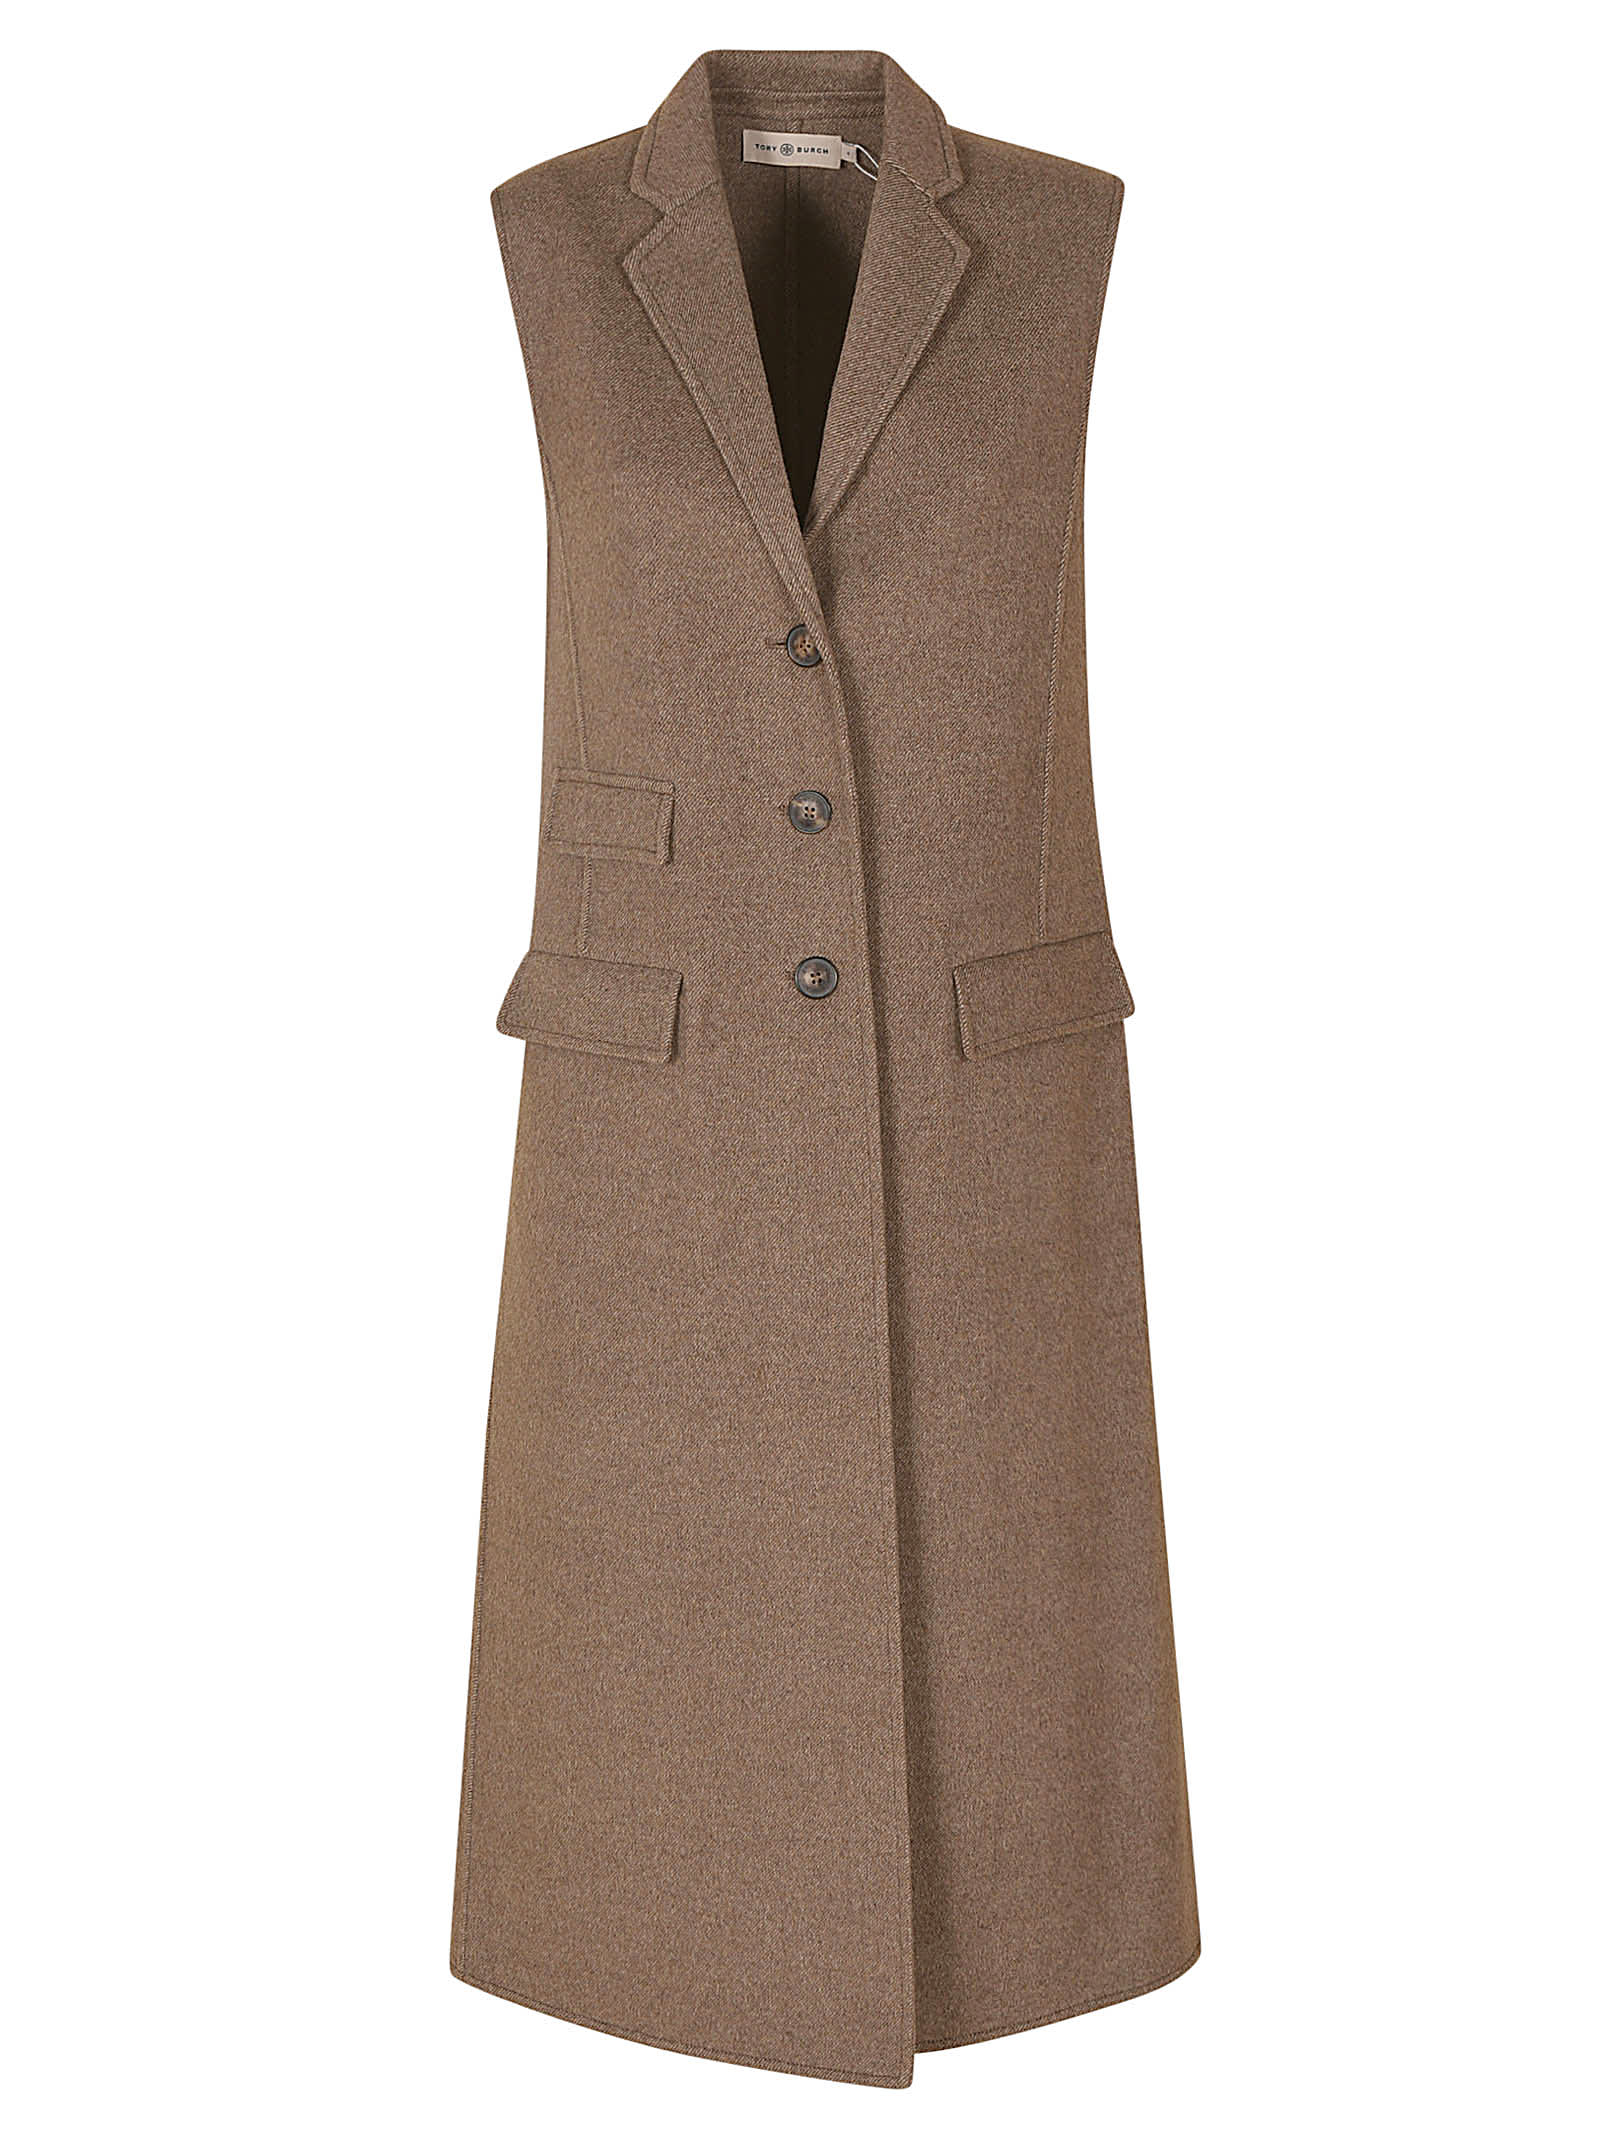 Tory Burch Double-faced Wool Tailored Vest